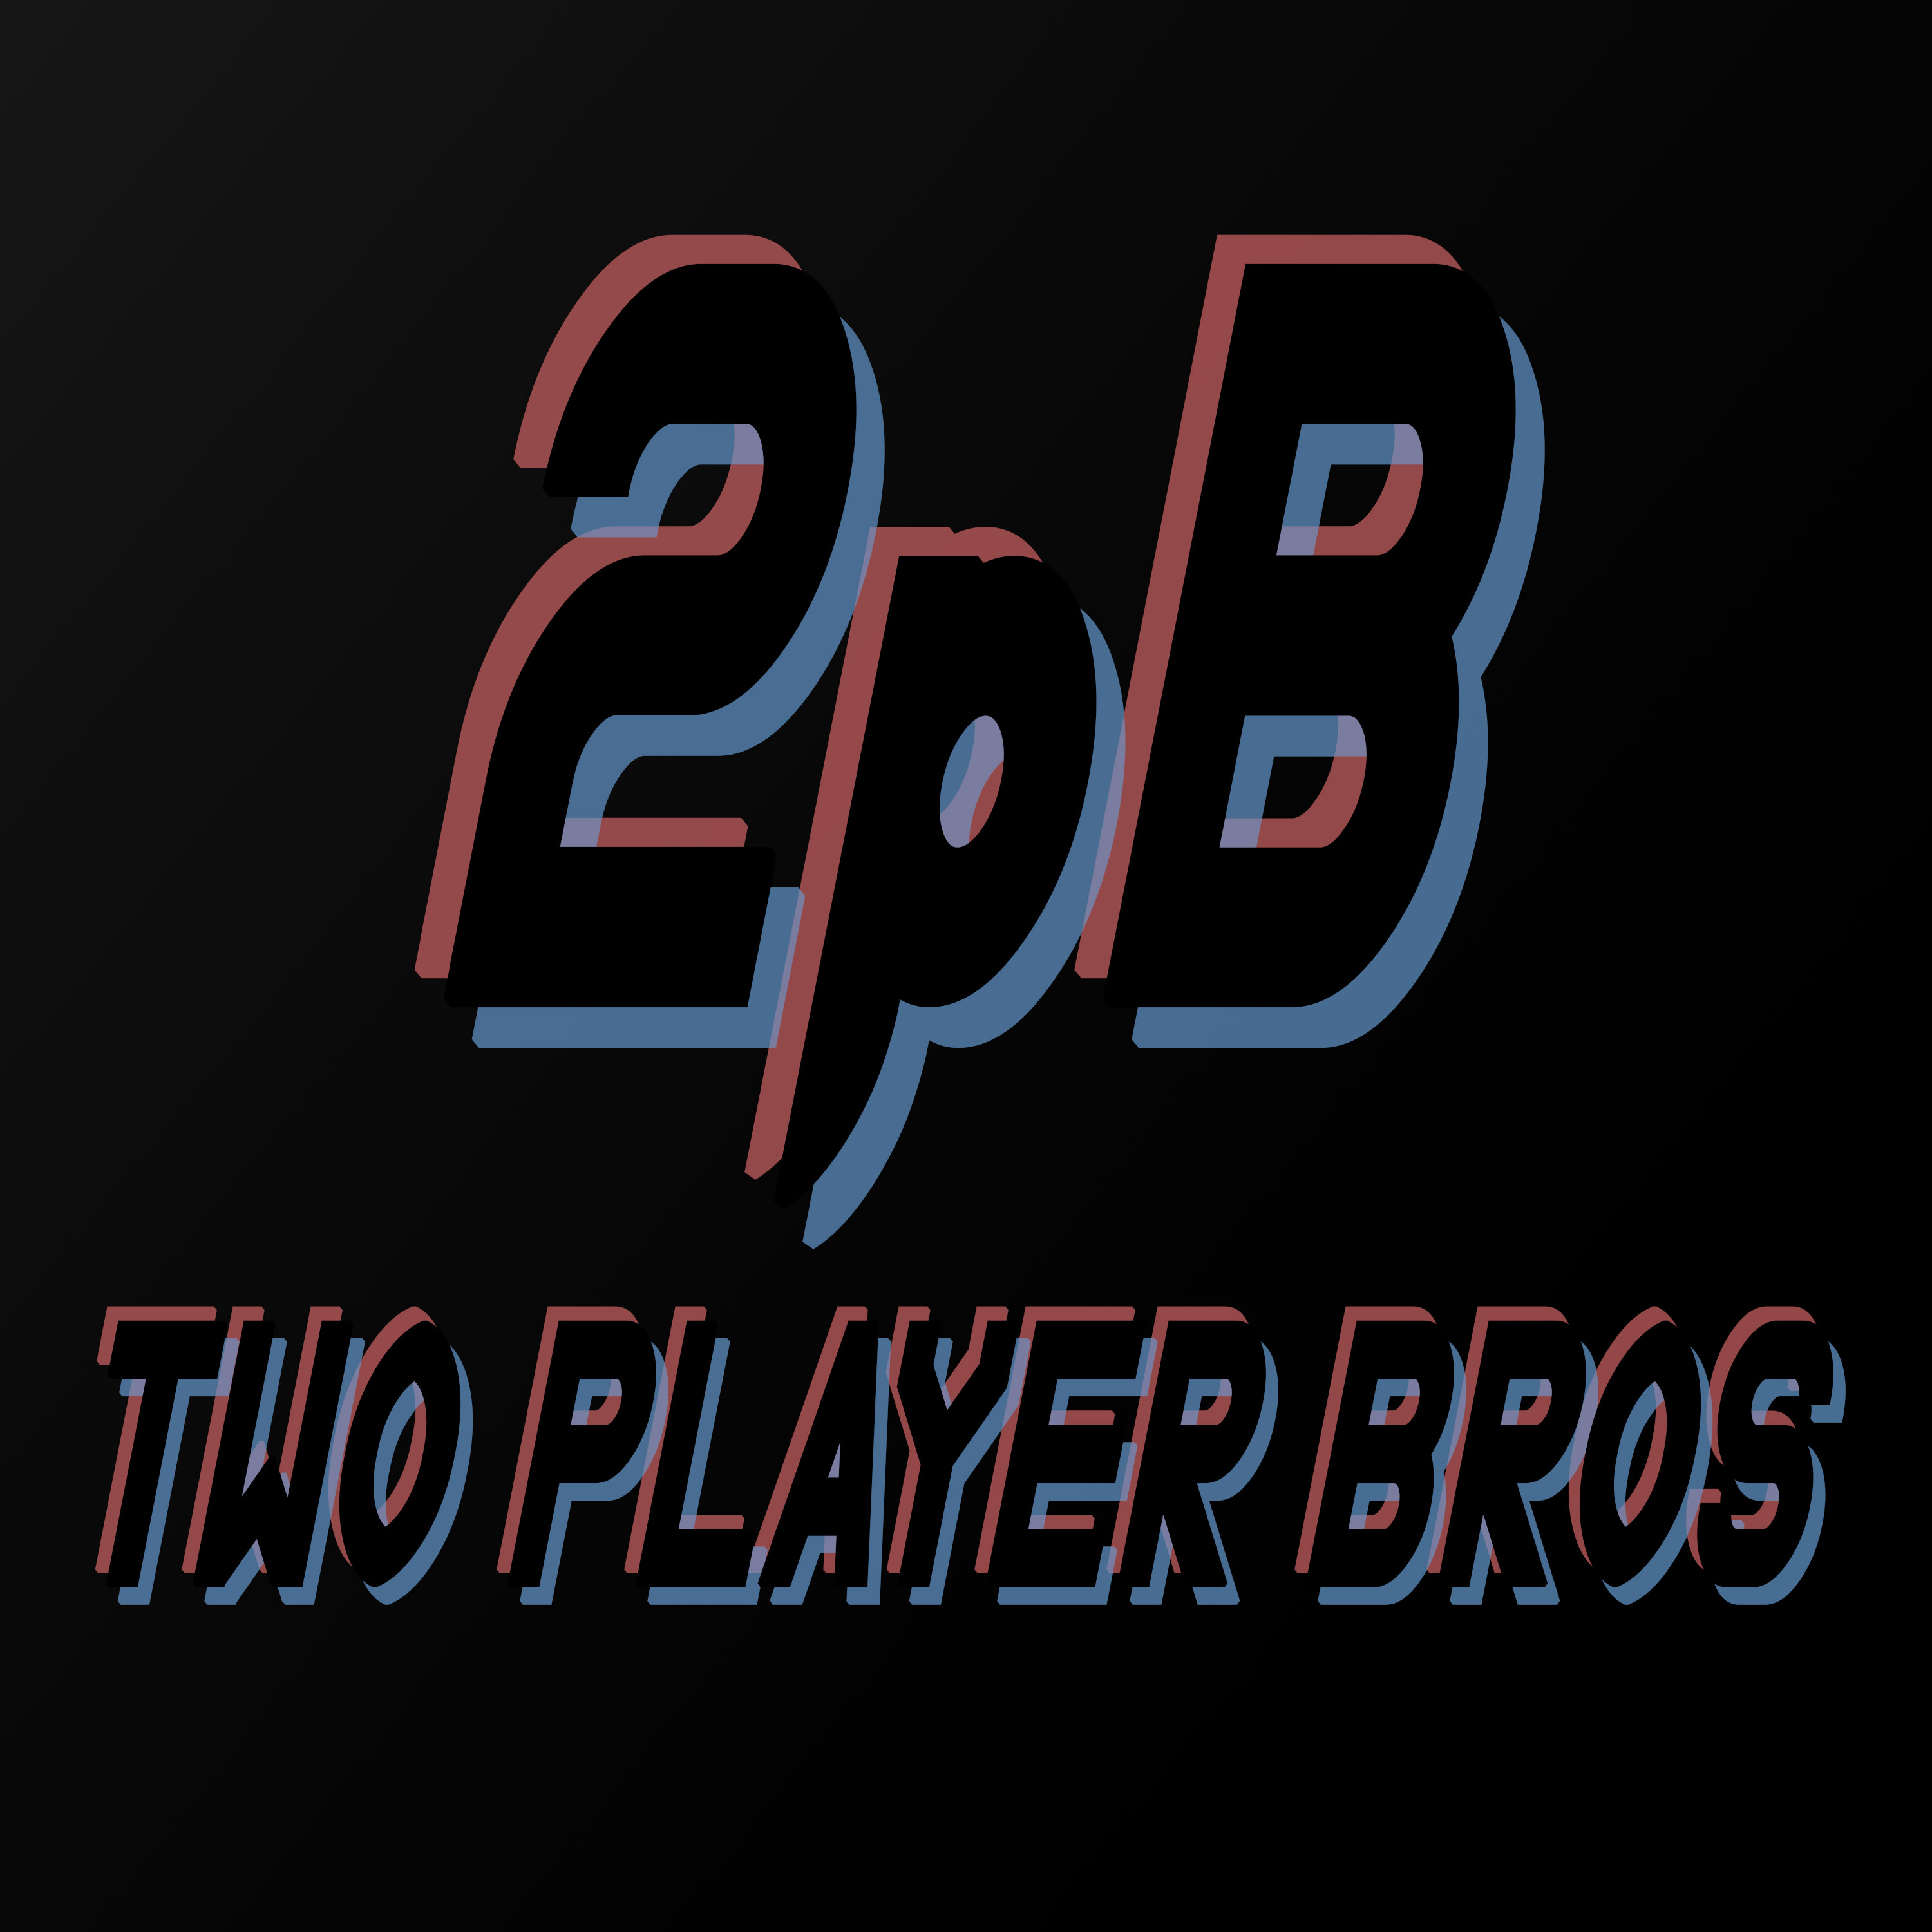 Show artwork for Two Player Bros